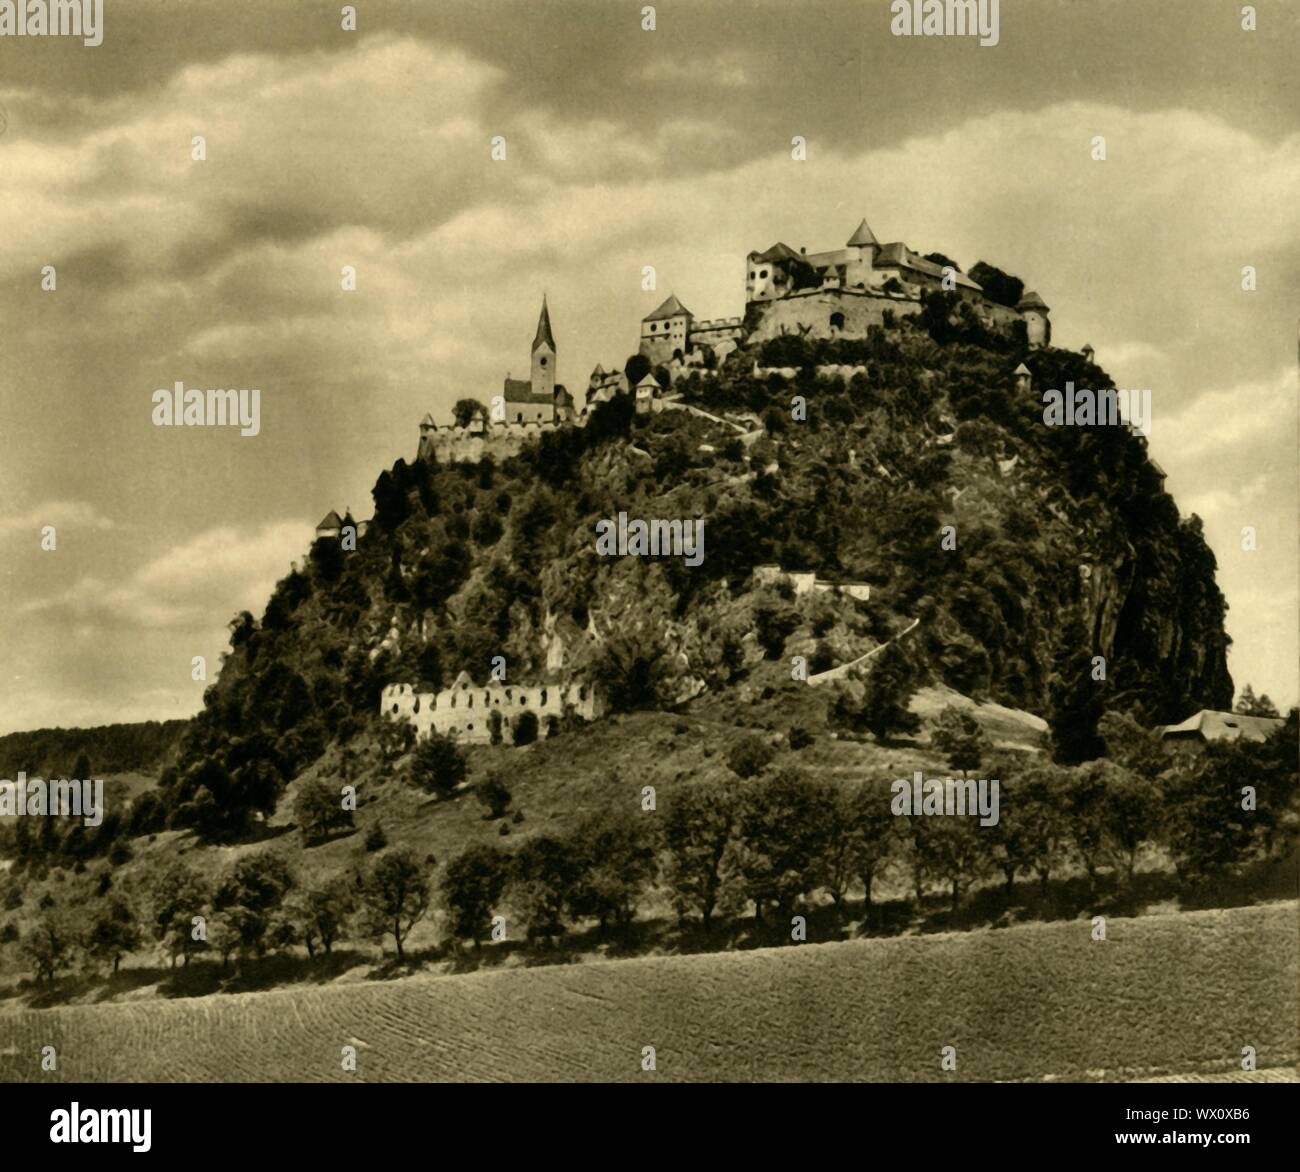 Hochosterwitz Castle, Carinthia, Austria, c1935. Burg Hochosterwitz is a medieval castle built on an outcrop of dolomite rock near Sankt Georgen am L&#xe4;ngsee in the state of Carinthia. From &quot;&#xd6;sterreich - Land Und Volk&quot;, (Austria, Land and People). [R. Lechner (Wilhelm M&#xfc;ller), Vienna, c1935] Stock Photo